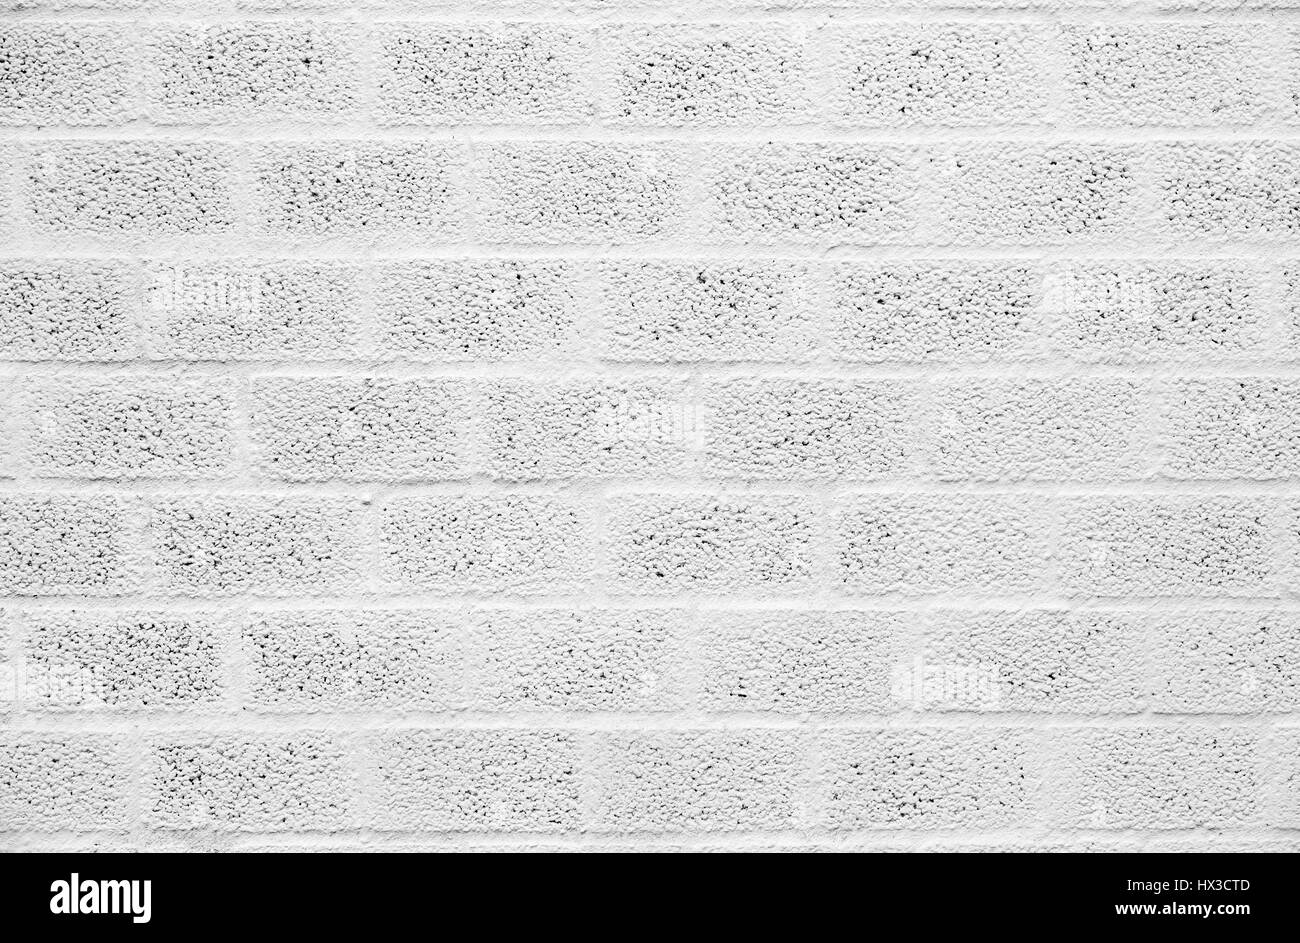 White painted concrete block wall Stock Photo